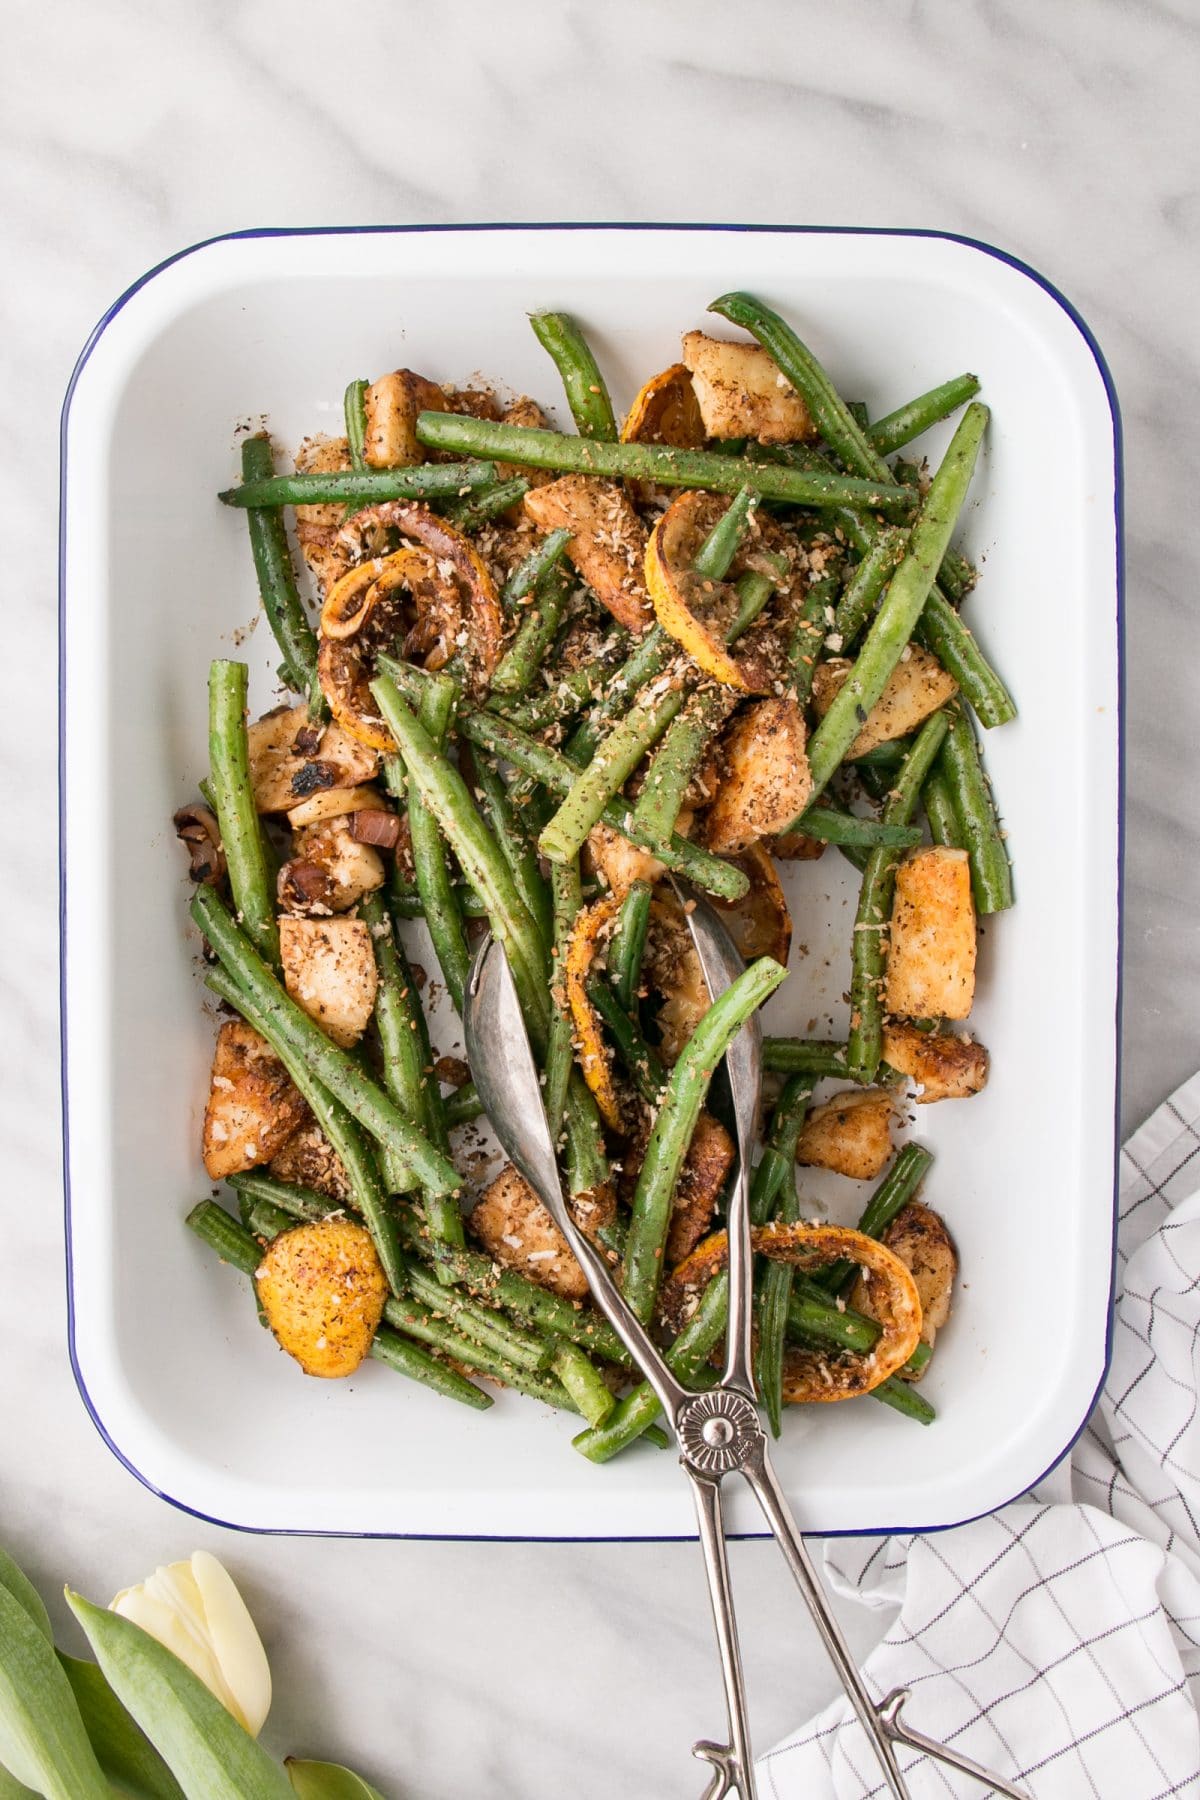 This Green Beans and Halloumi Salad with Roasted Lemons and Shallots has crisp and crunchy green beans with salty Halloumi cheese and flavours bursts from roasted lemon and shallots. #greenbeans #salad